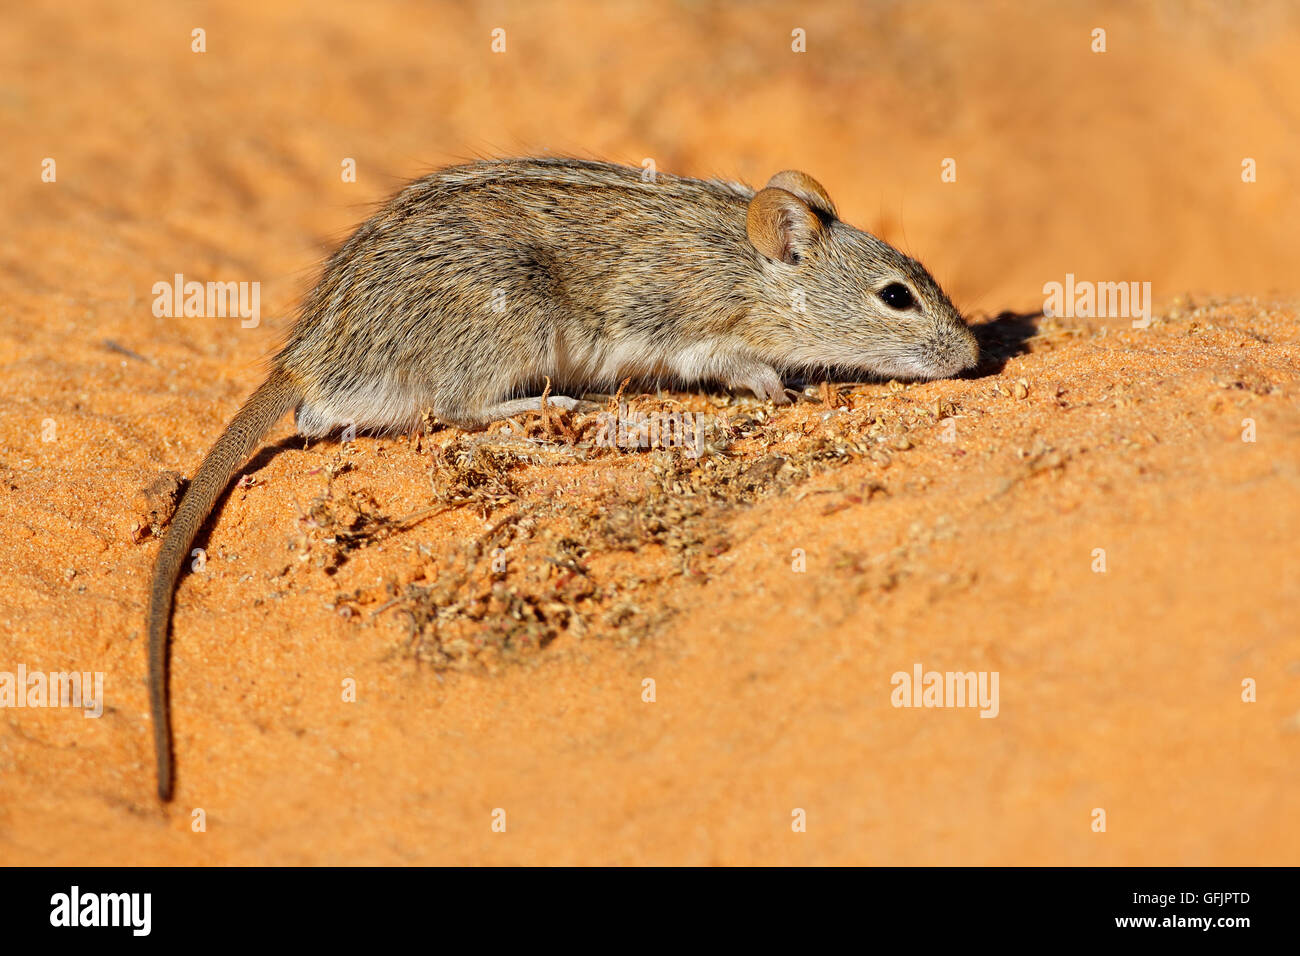 A striped mouse (Rhabdomys pumilio) in natural habitat, South Africa Stock Photo